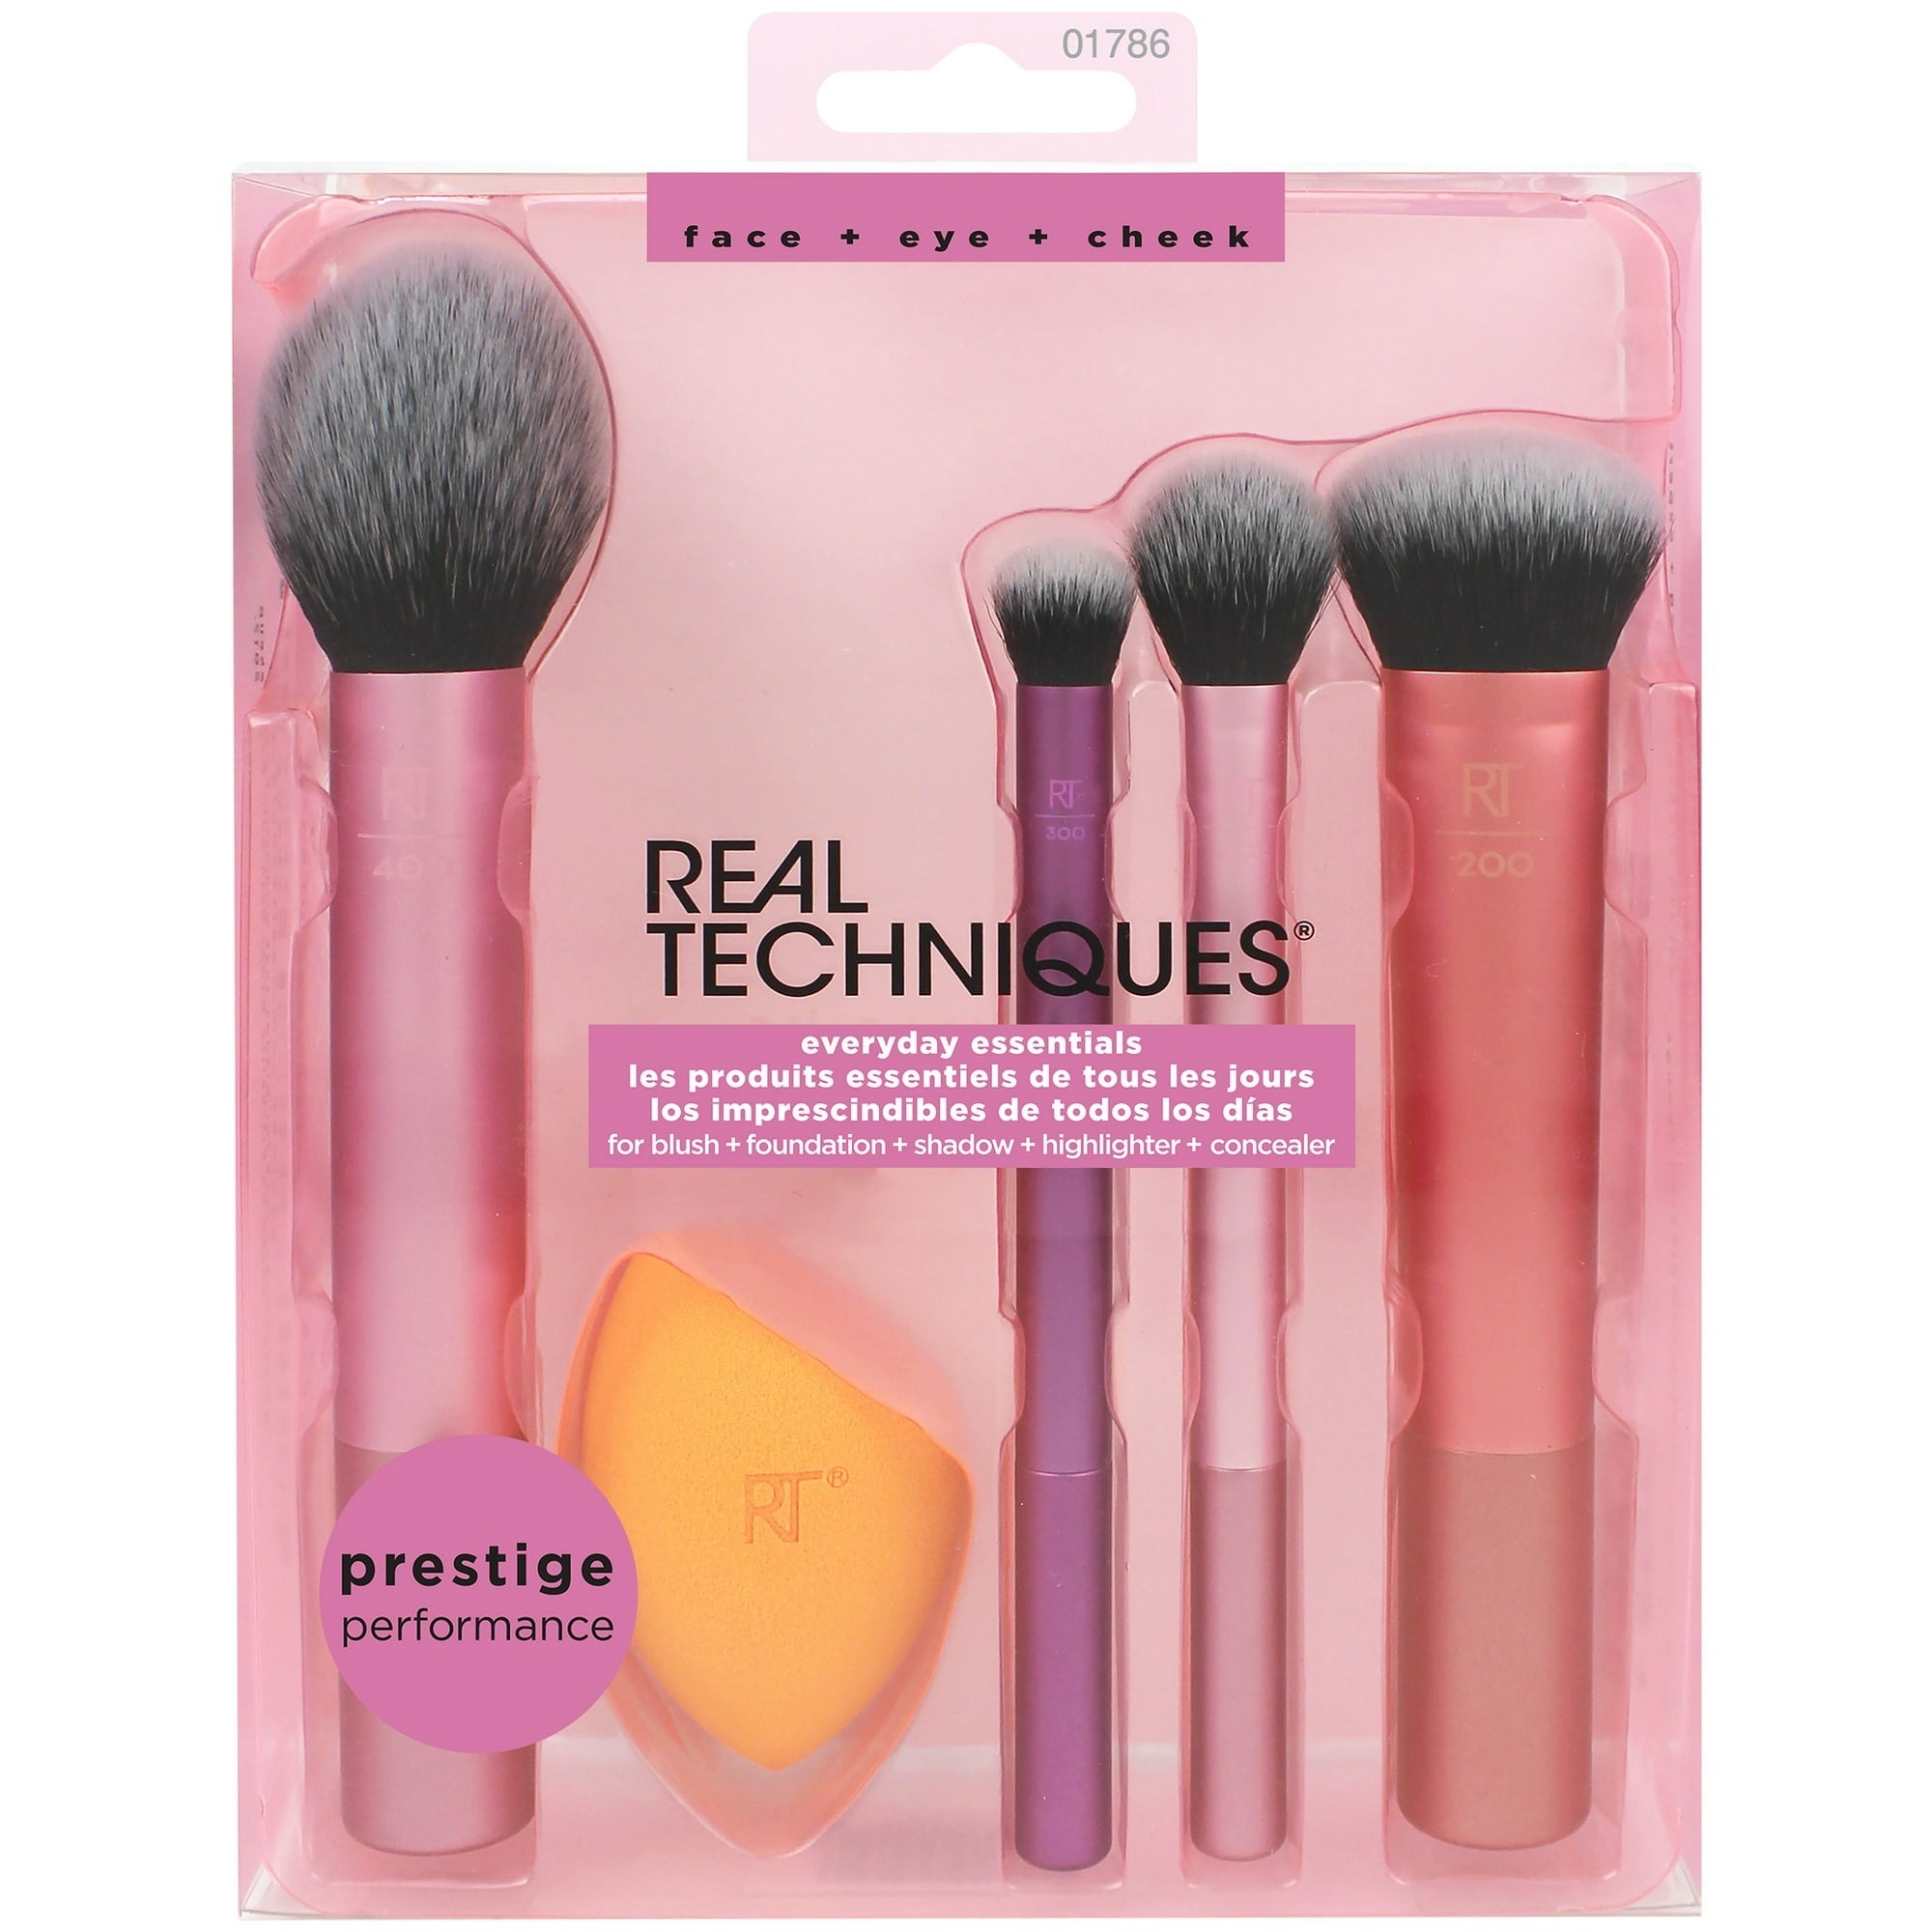 set of makeup brushes and a sponge